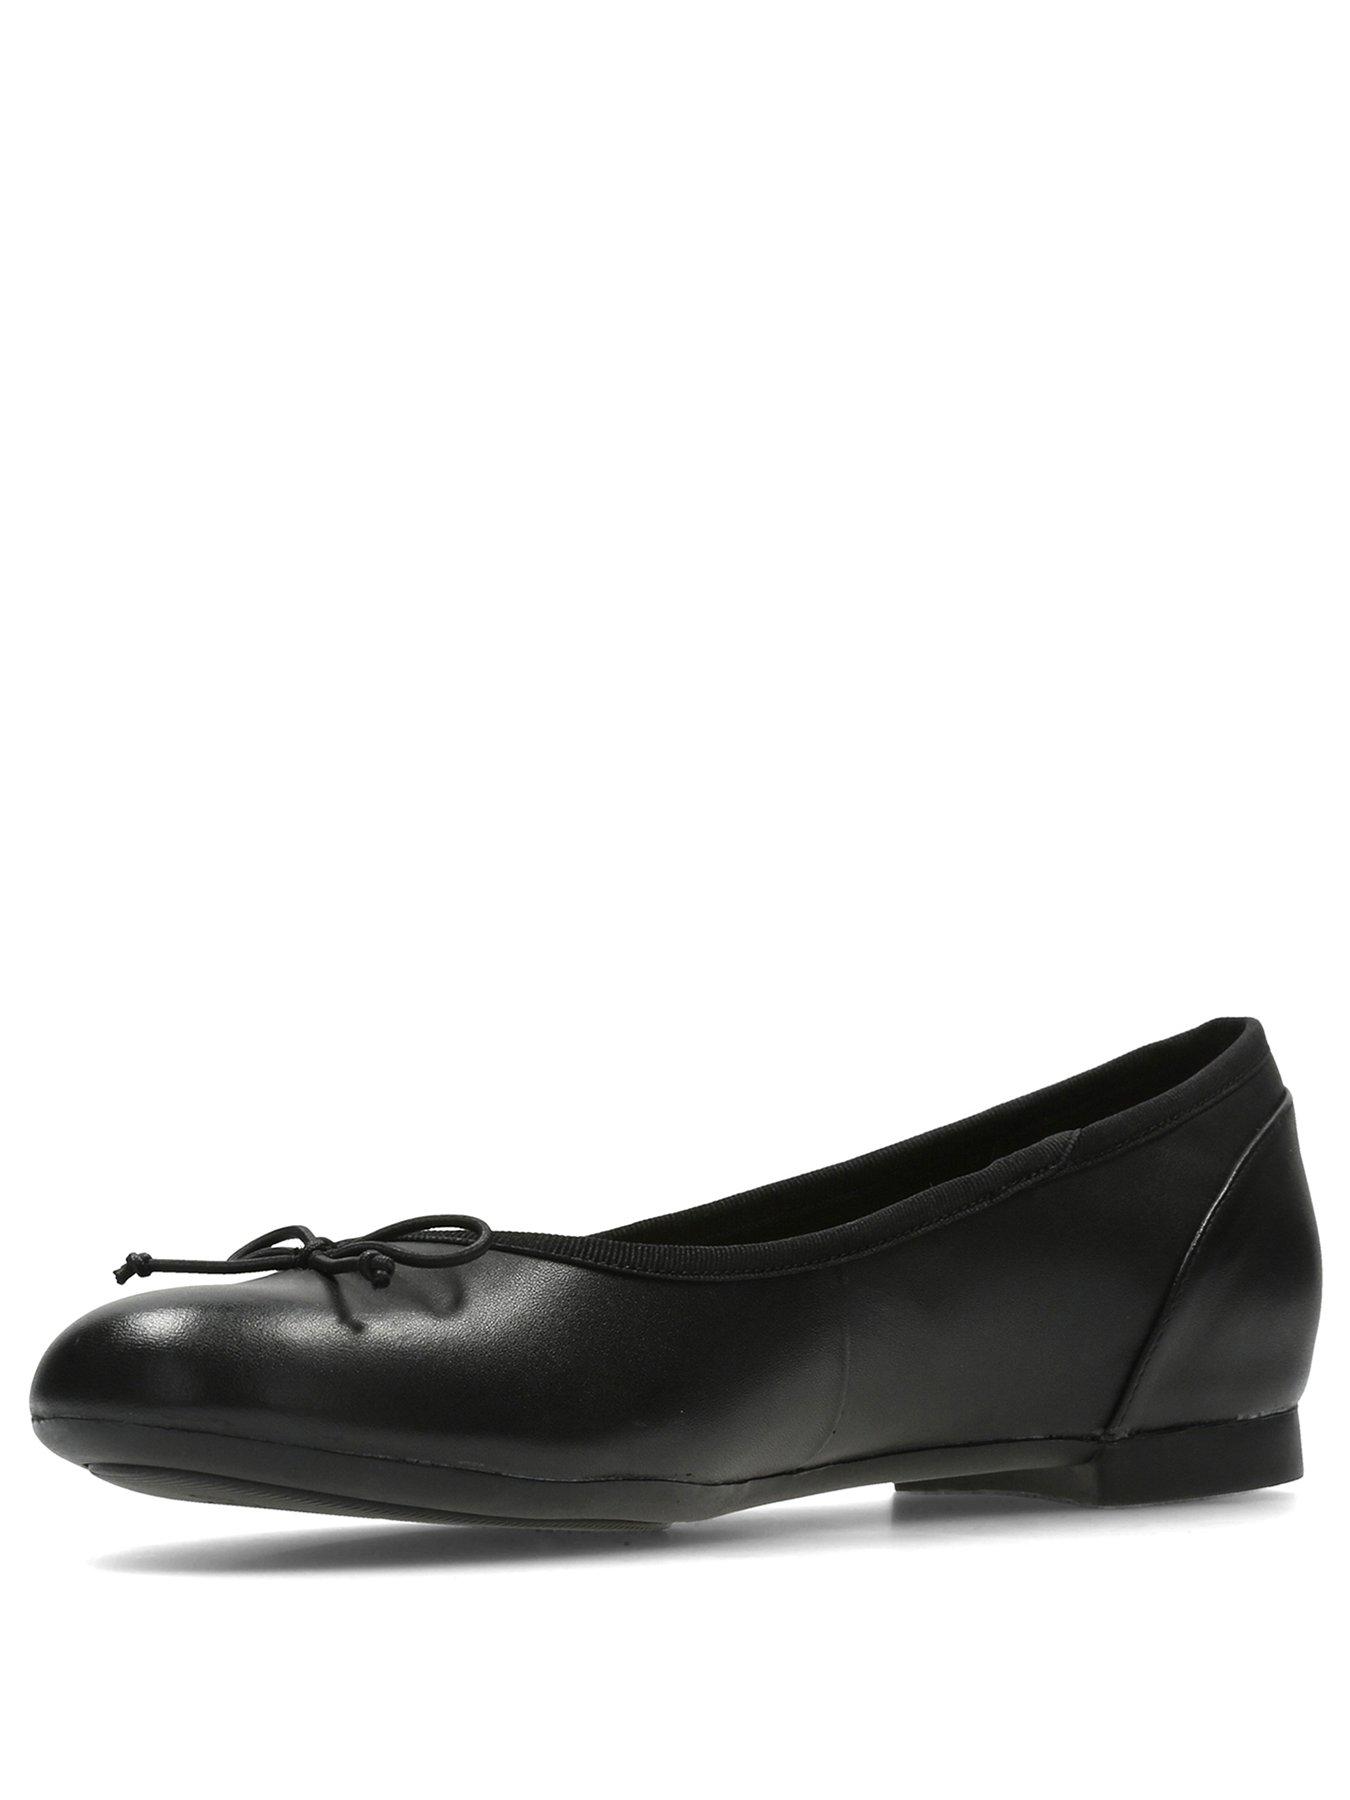 Clarks Shoes | Womens Clarks Shoes 